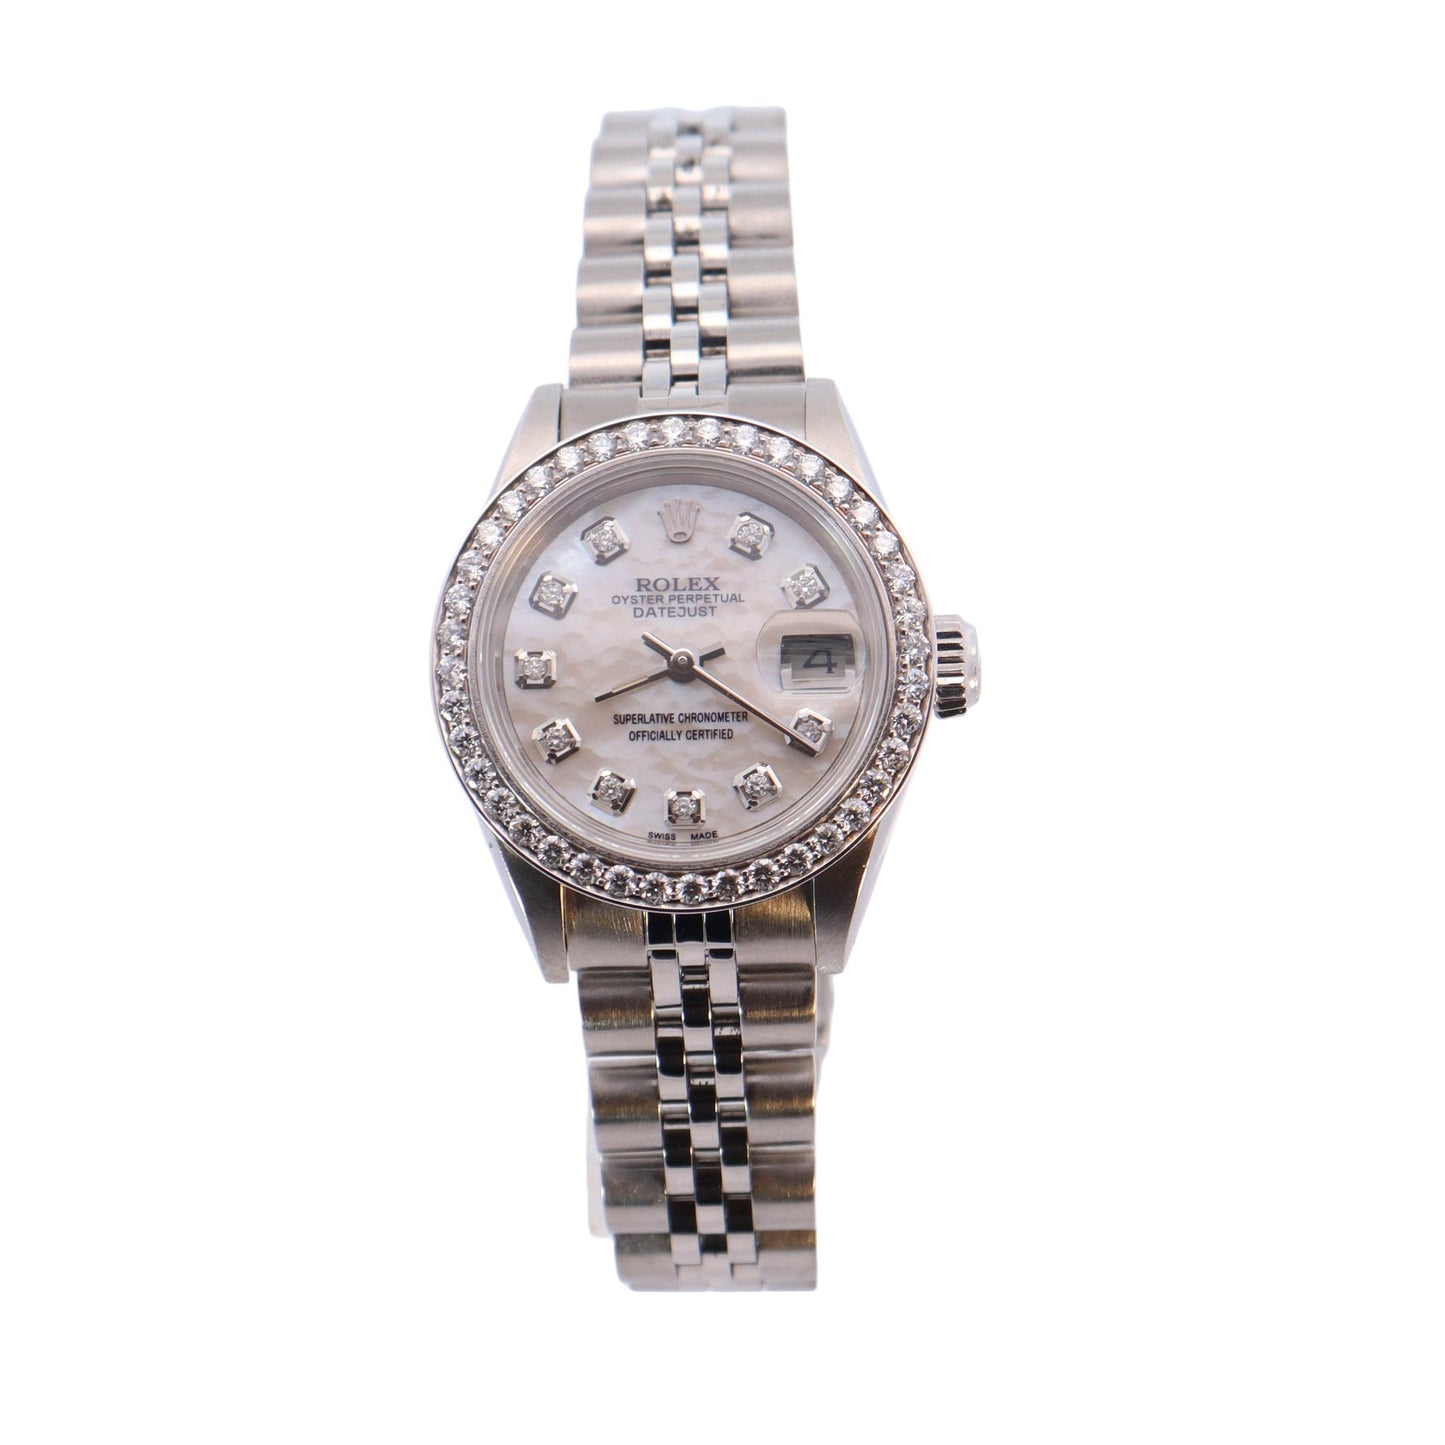 Rolex Datejust Stainless Steel 26mm White MOP Diamond Dial Watch  Reference #: 69174